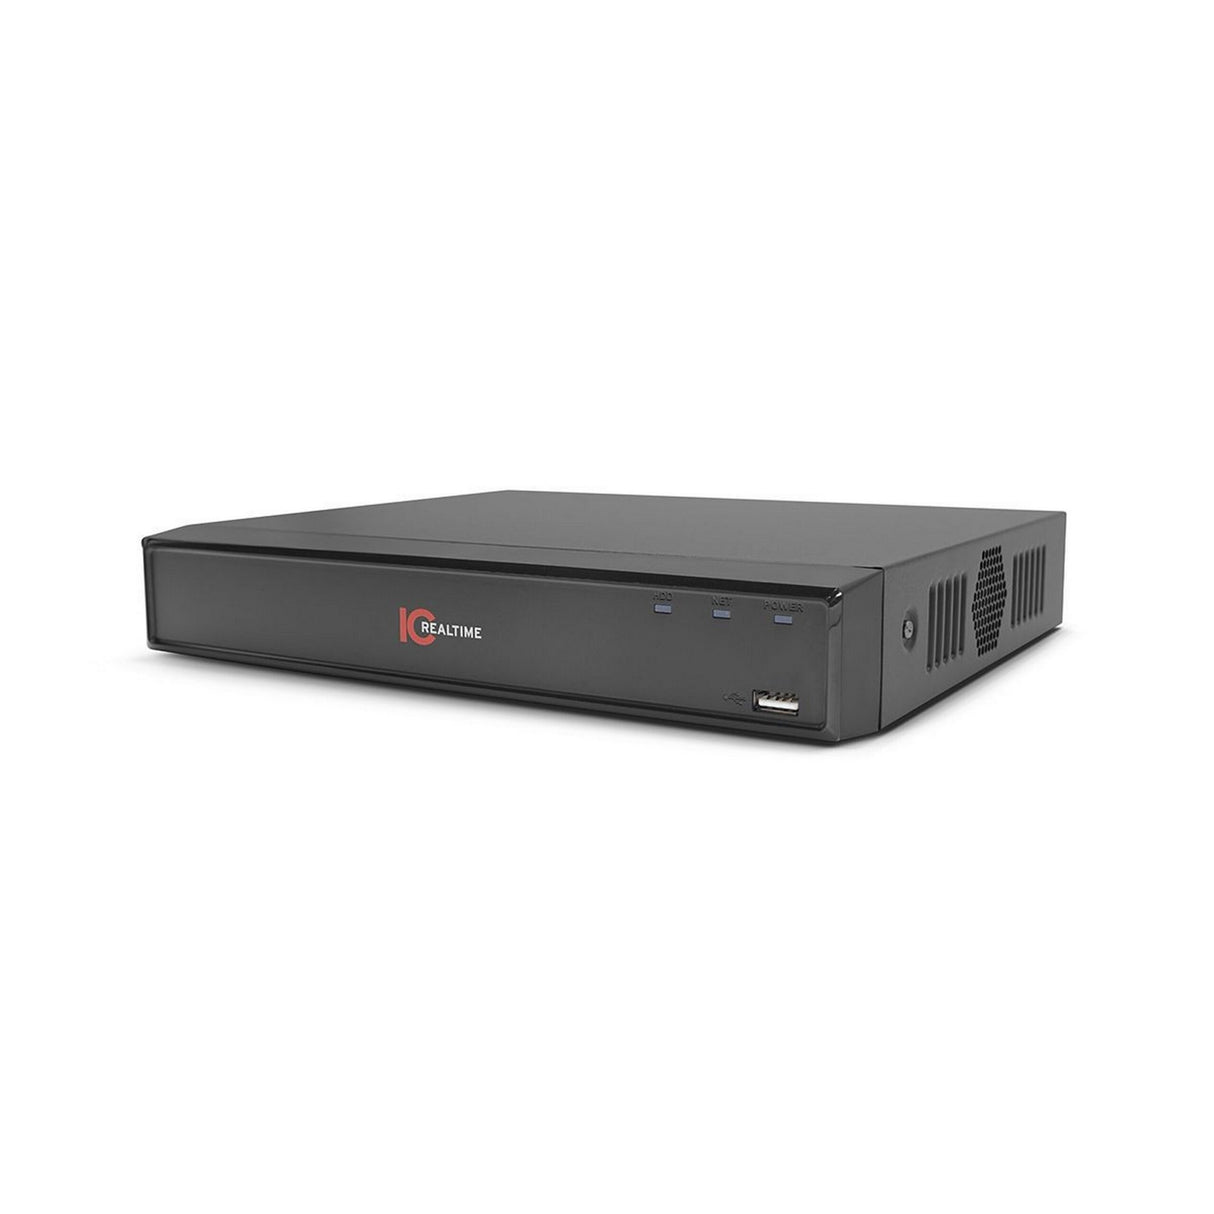 IC Realtime NVR-208NS 8-Channel 1U NVR with Integrated 8-Port POE Switch with 2TB Hard Drive